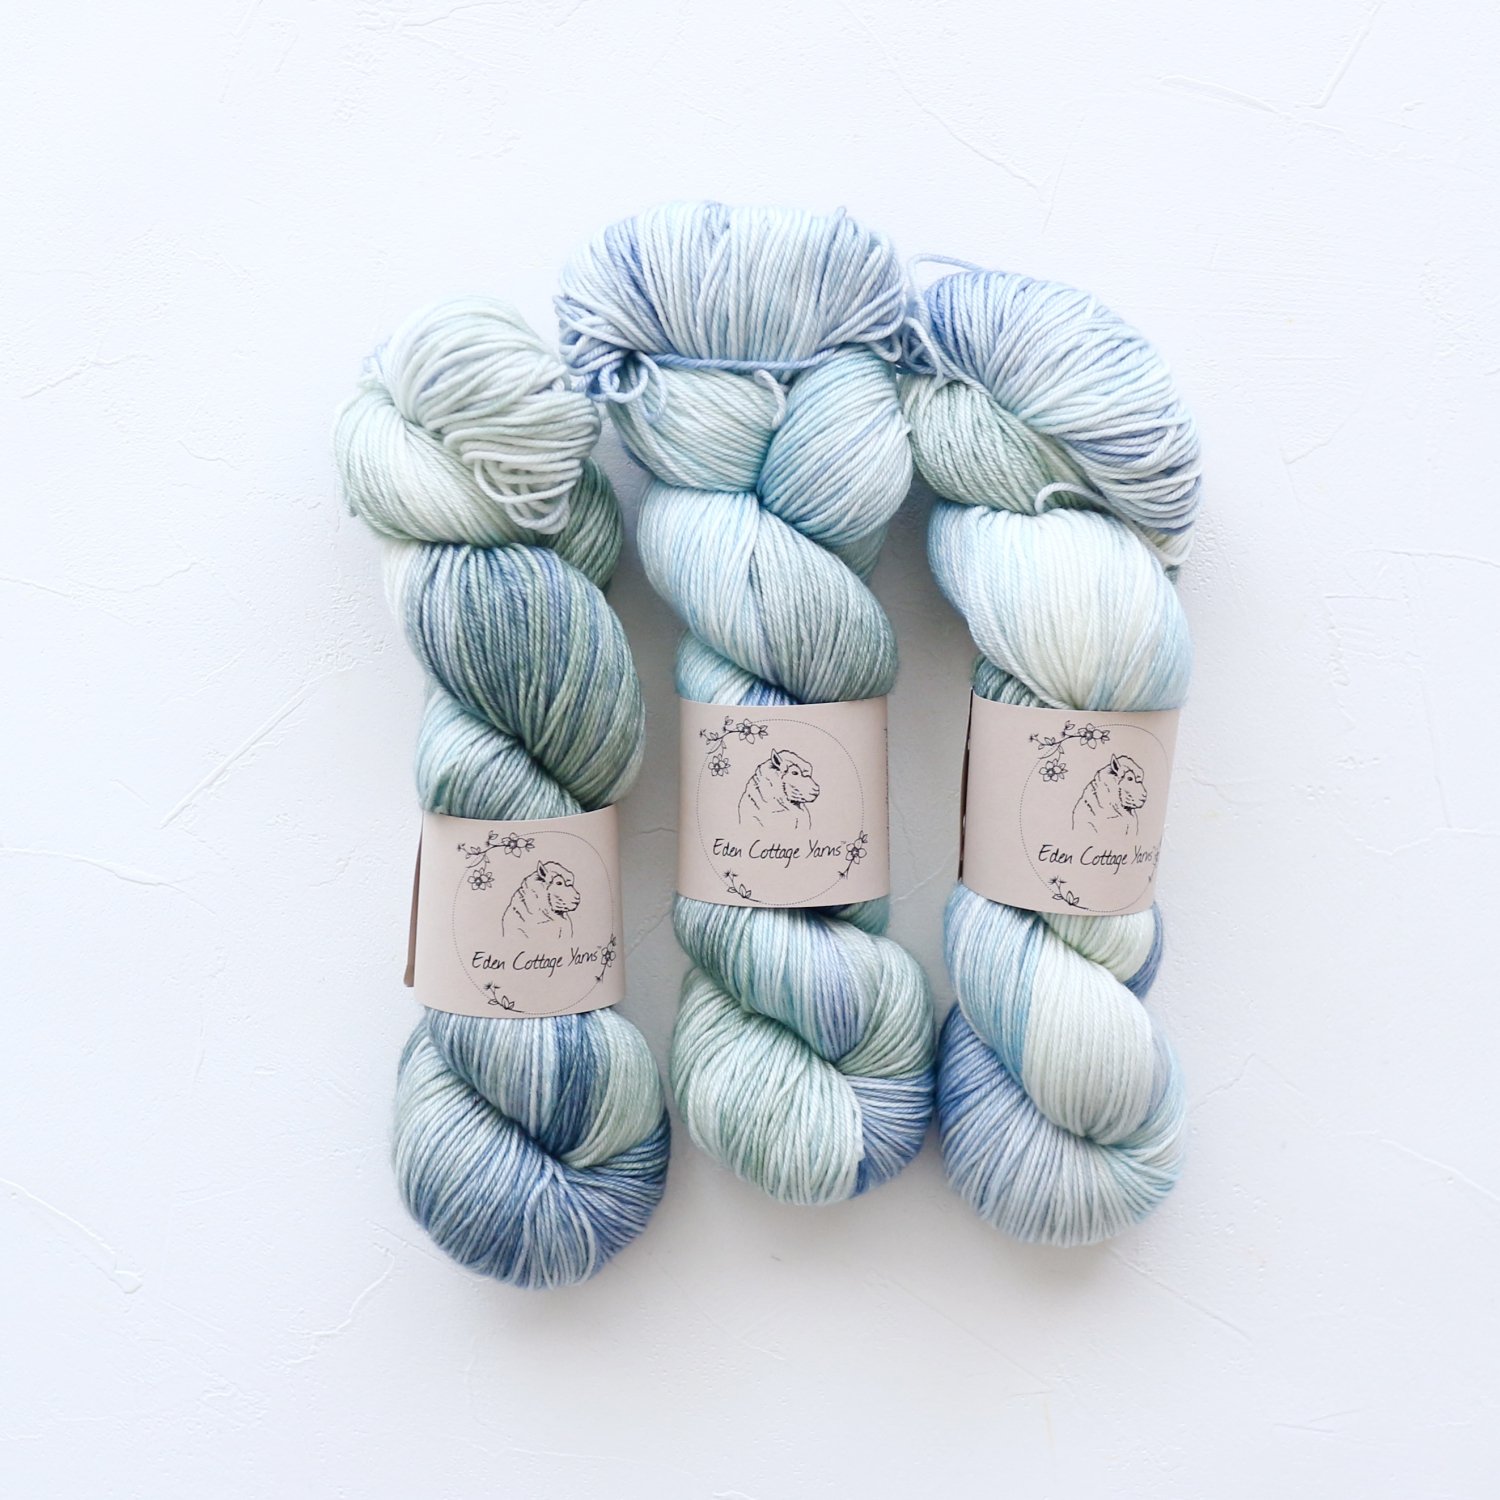 【Eden Cottage Yarns】<br>Pendle 4ply<br>Meadow Grasses